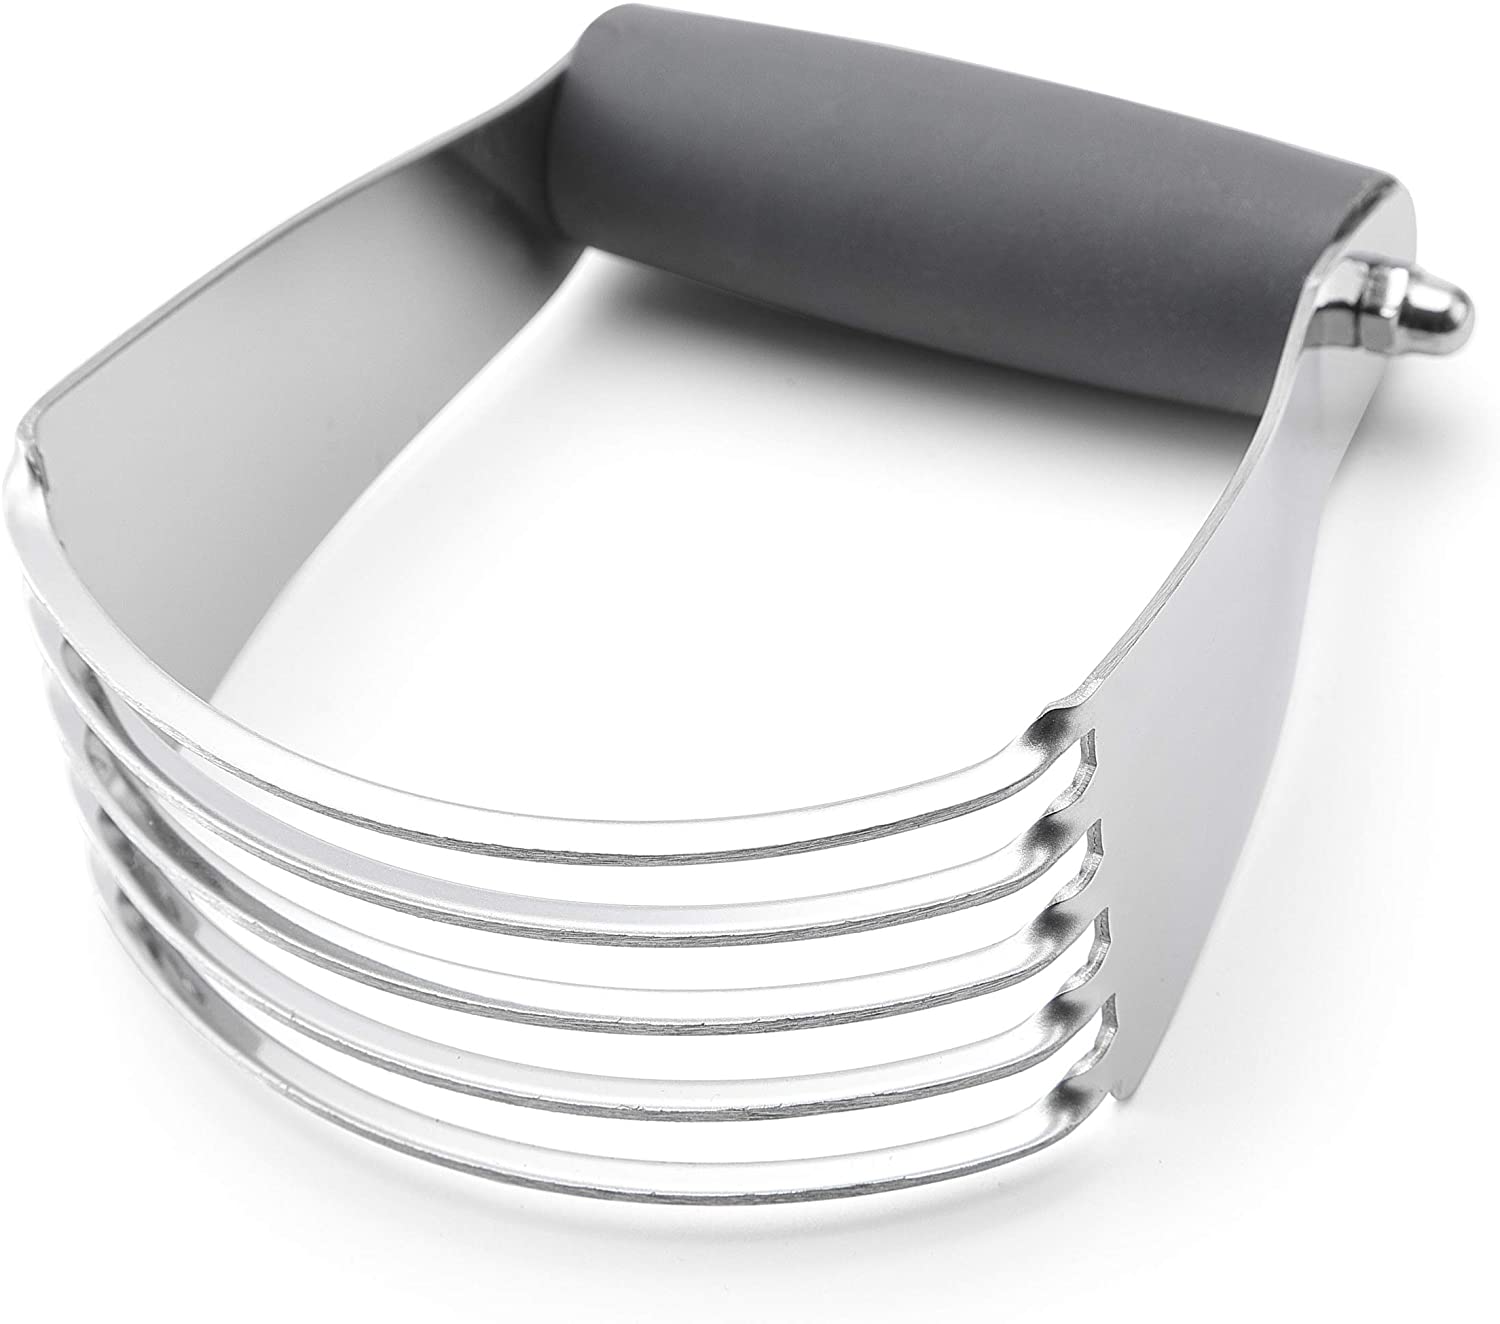 Deiss Pro Pastry Cutter - Stainless Steel Pastry Blender & Dough Cutter  with Non-Slip Handle